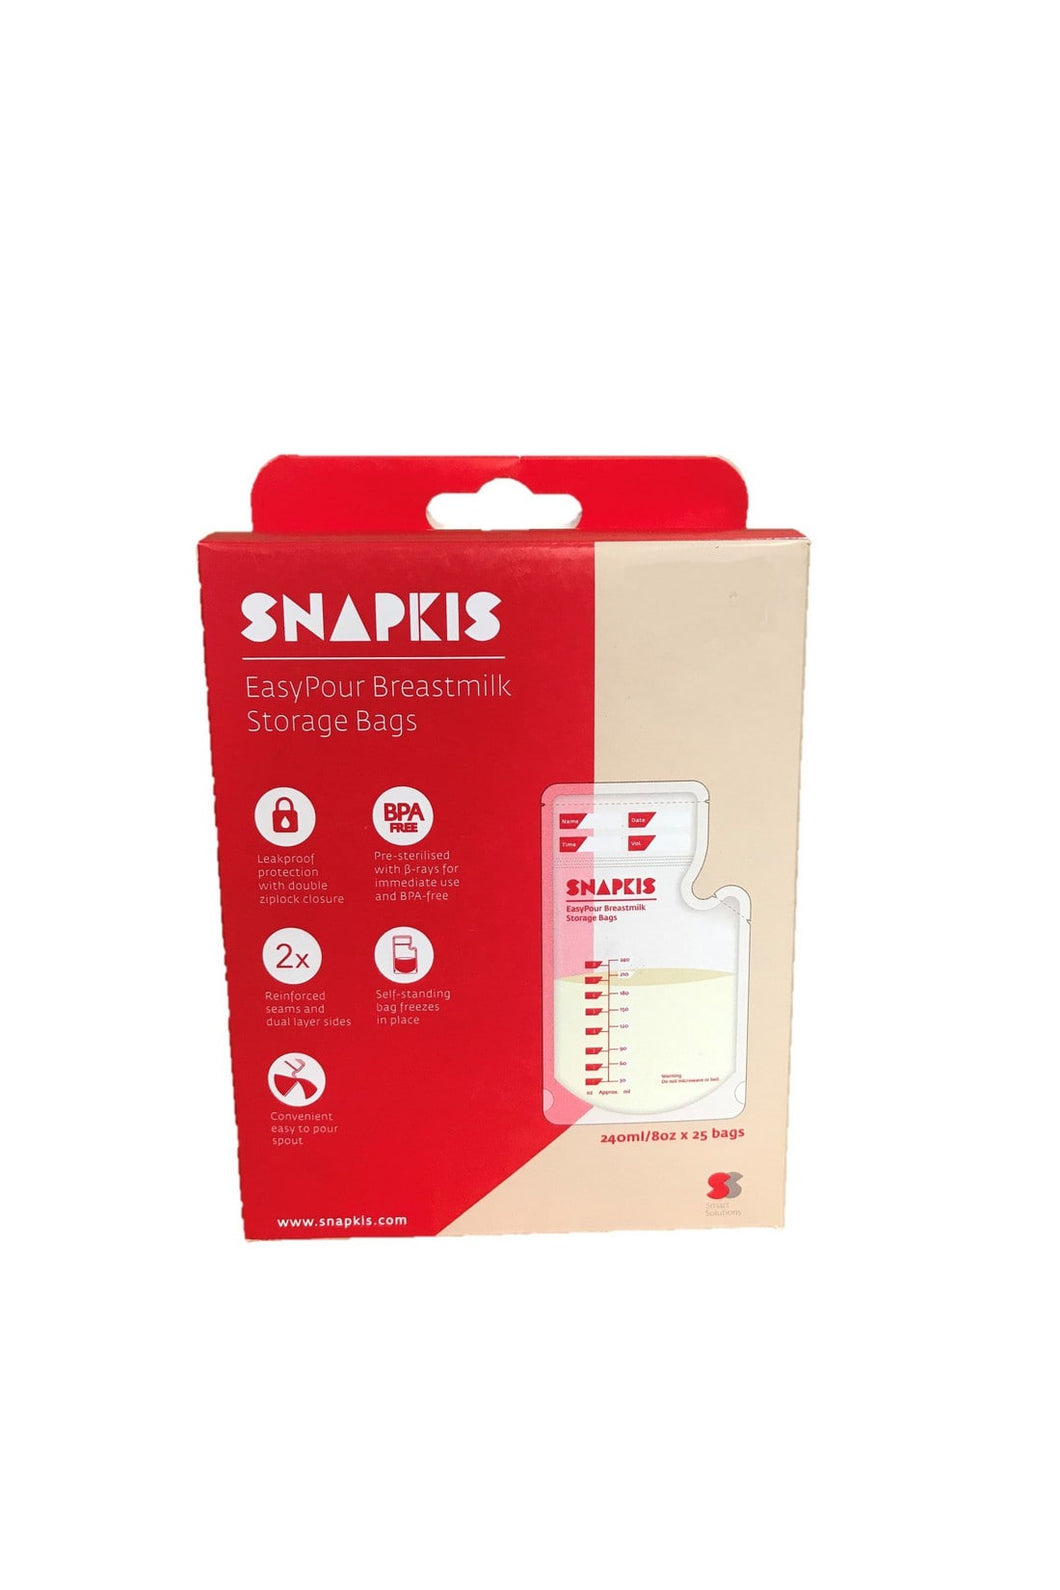 Snapkis Easy Pour Breastmilk Storage Bags 240Ml 25 Pack 1